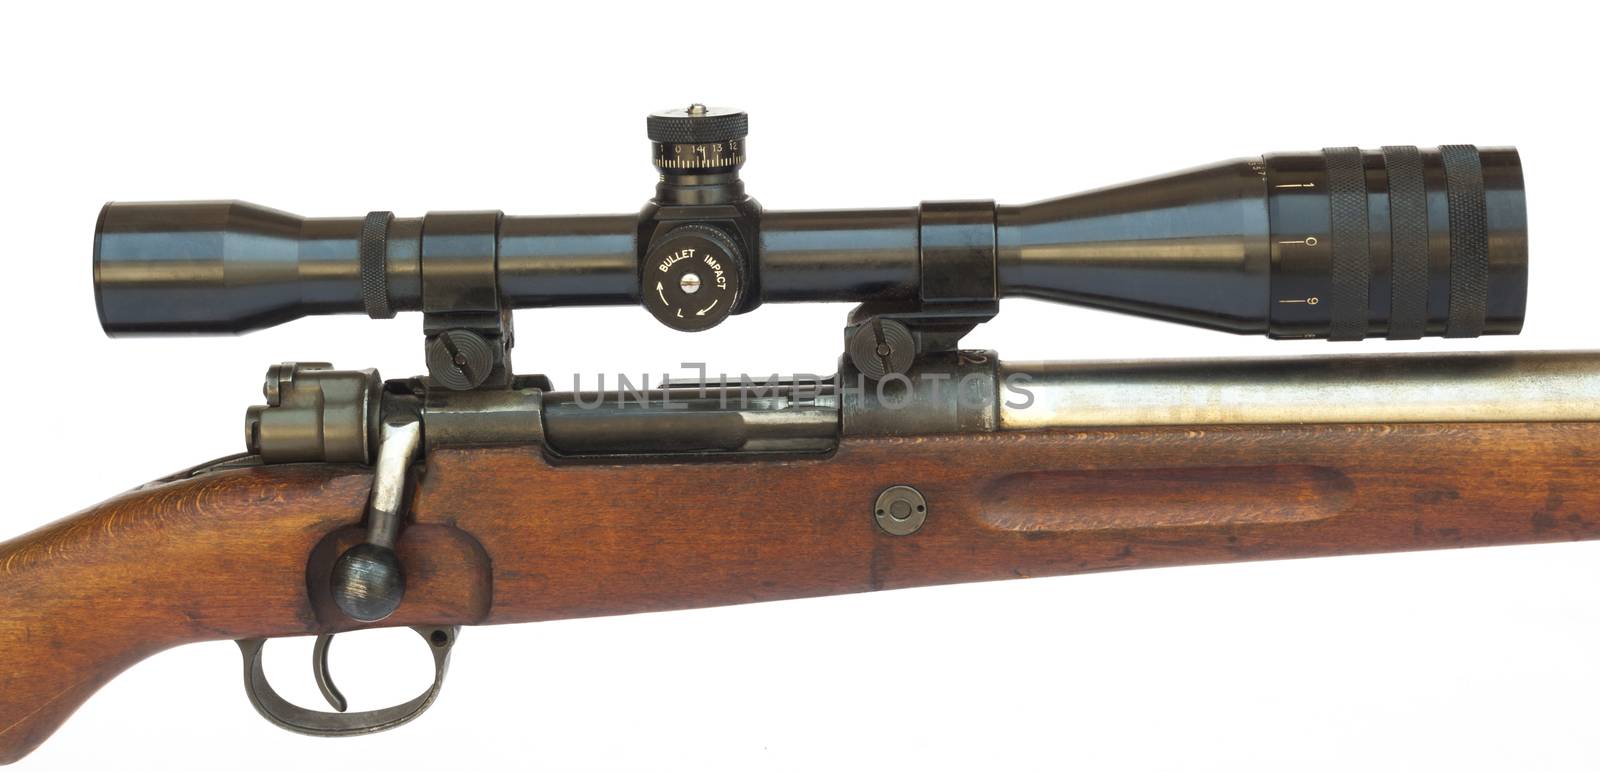 Rifle Scope by orcearo